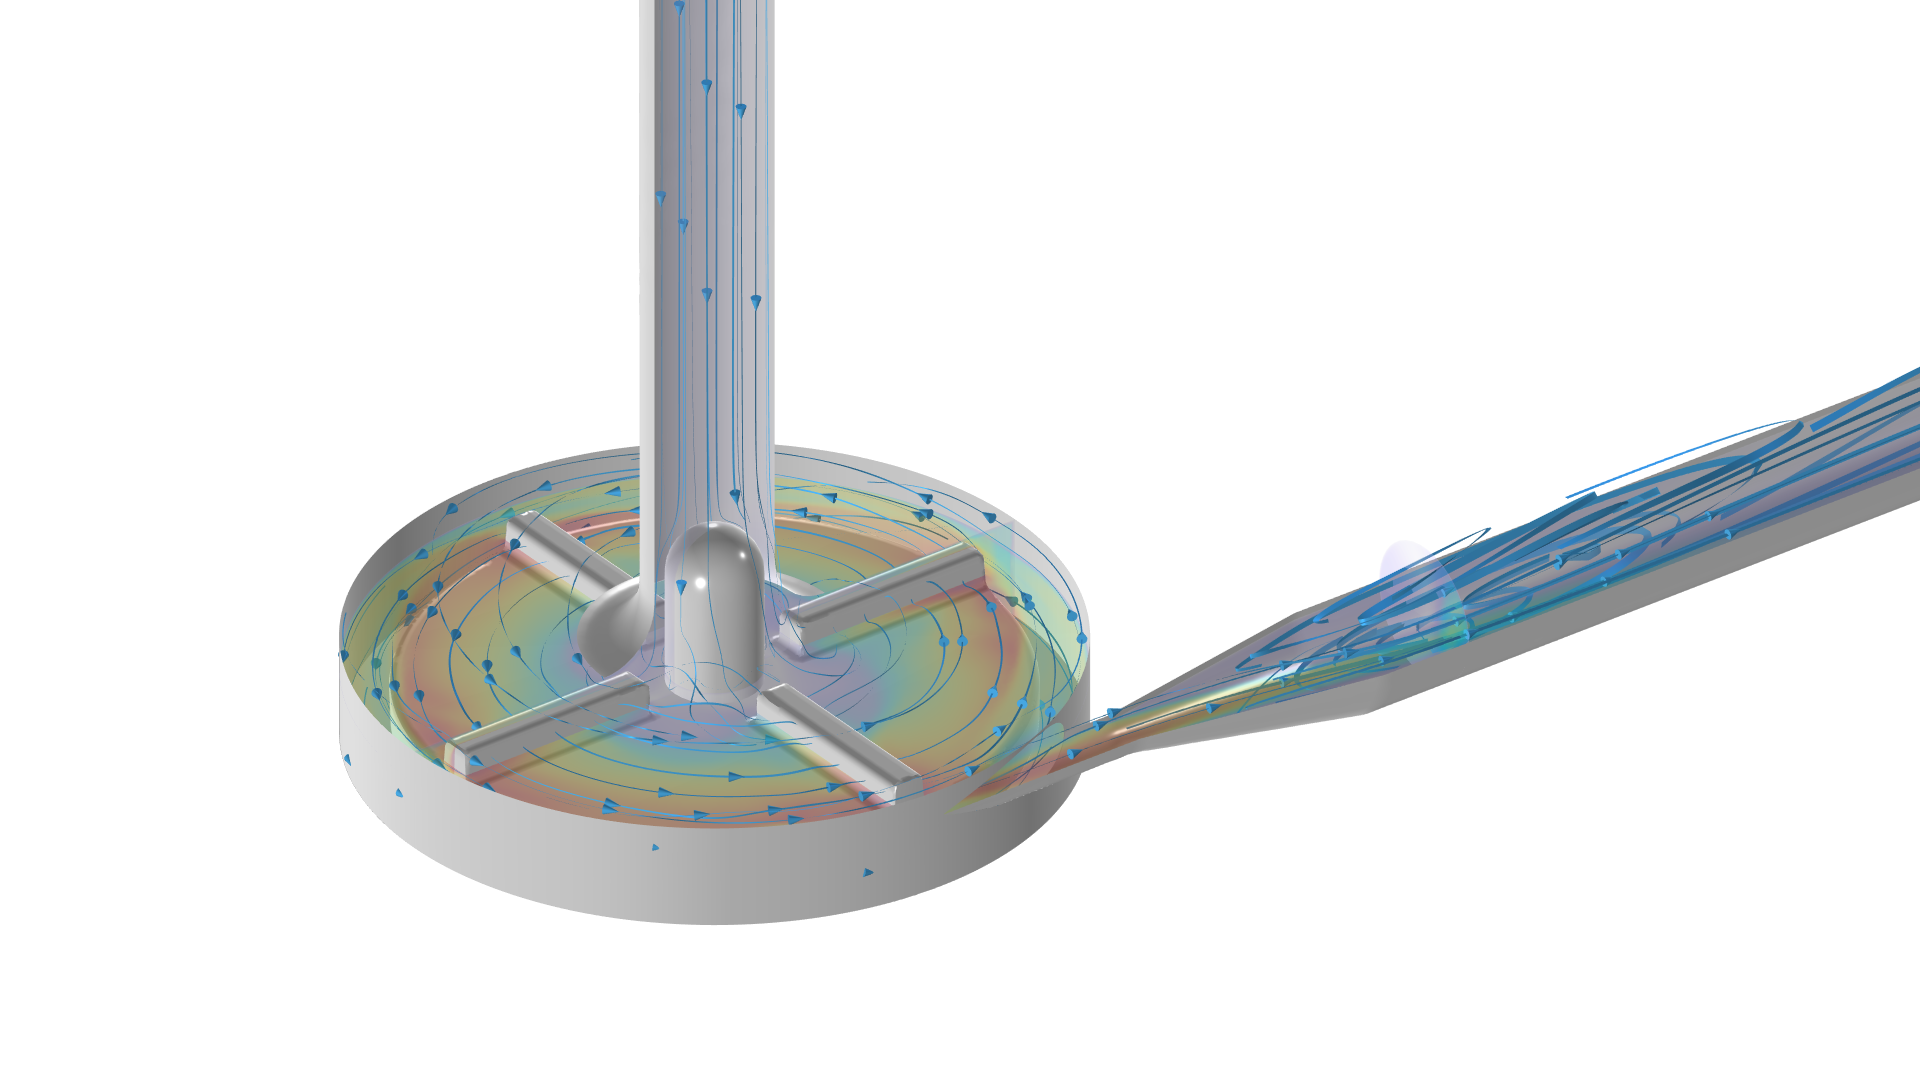 A benchmark model of a centrifugal blood pump rendered in the COMSOL software depicts fluid flow.